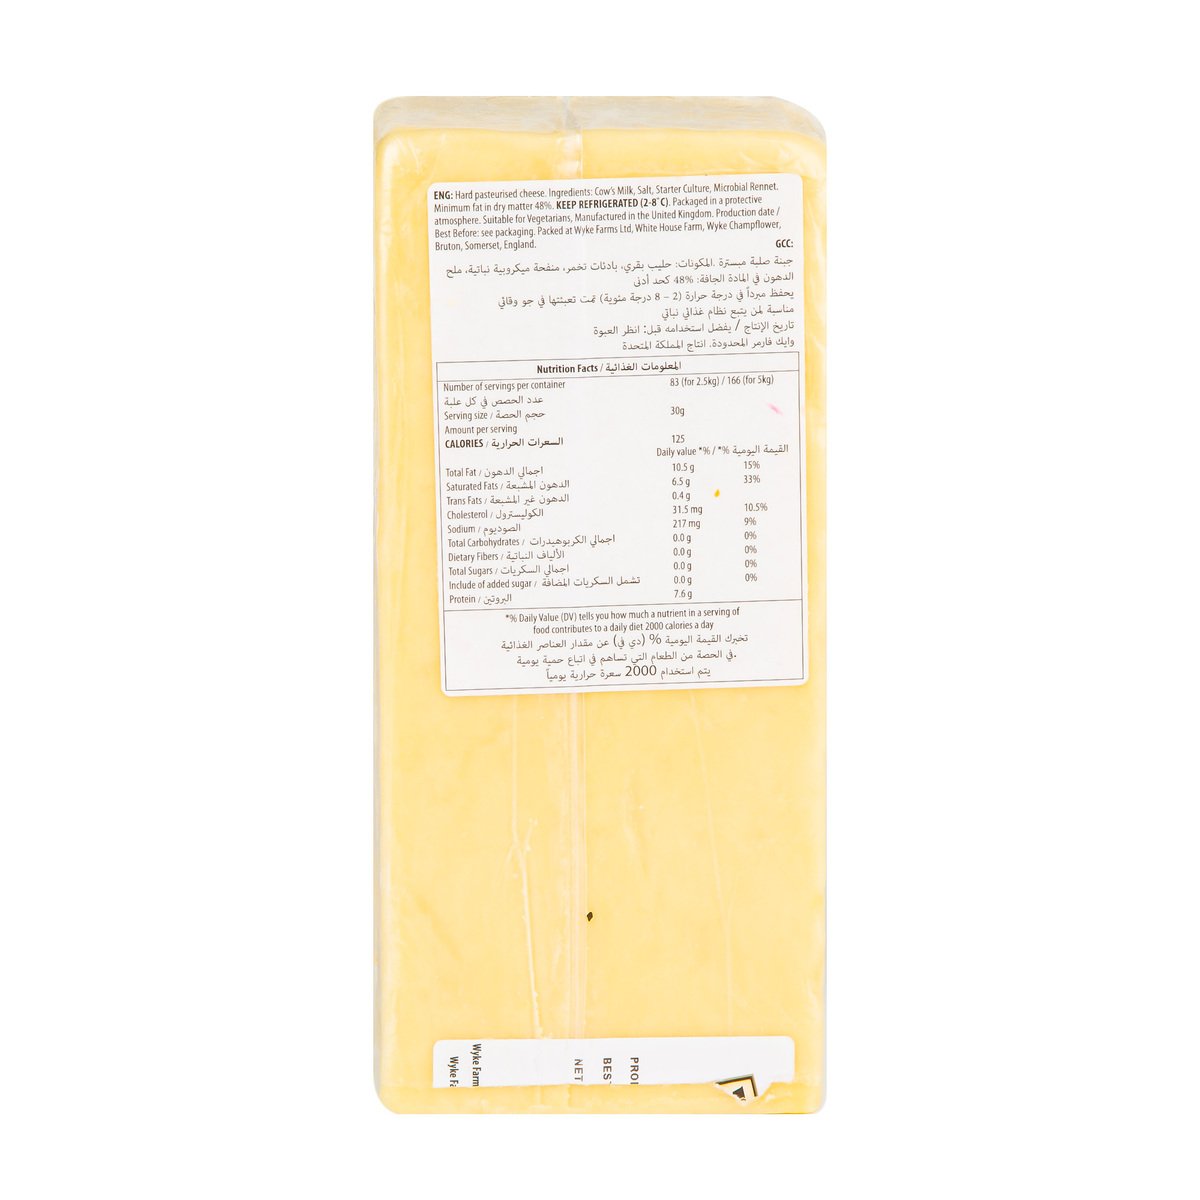 Wyke Farms English White Mature And Creamy Cheddar Slices 250 g